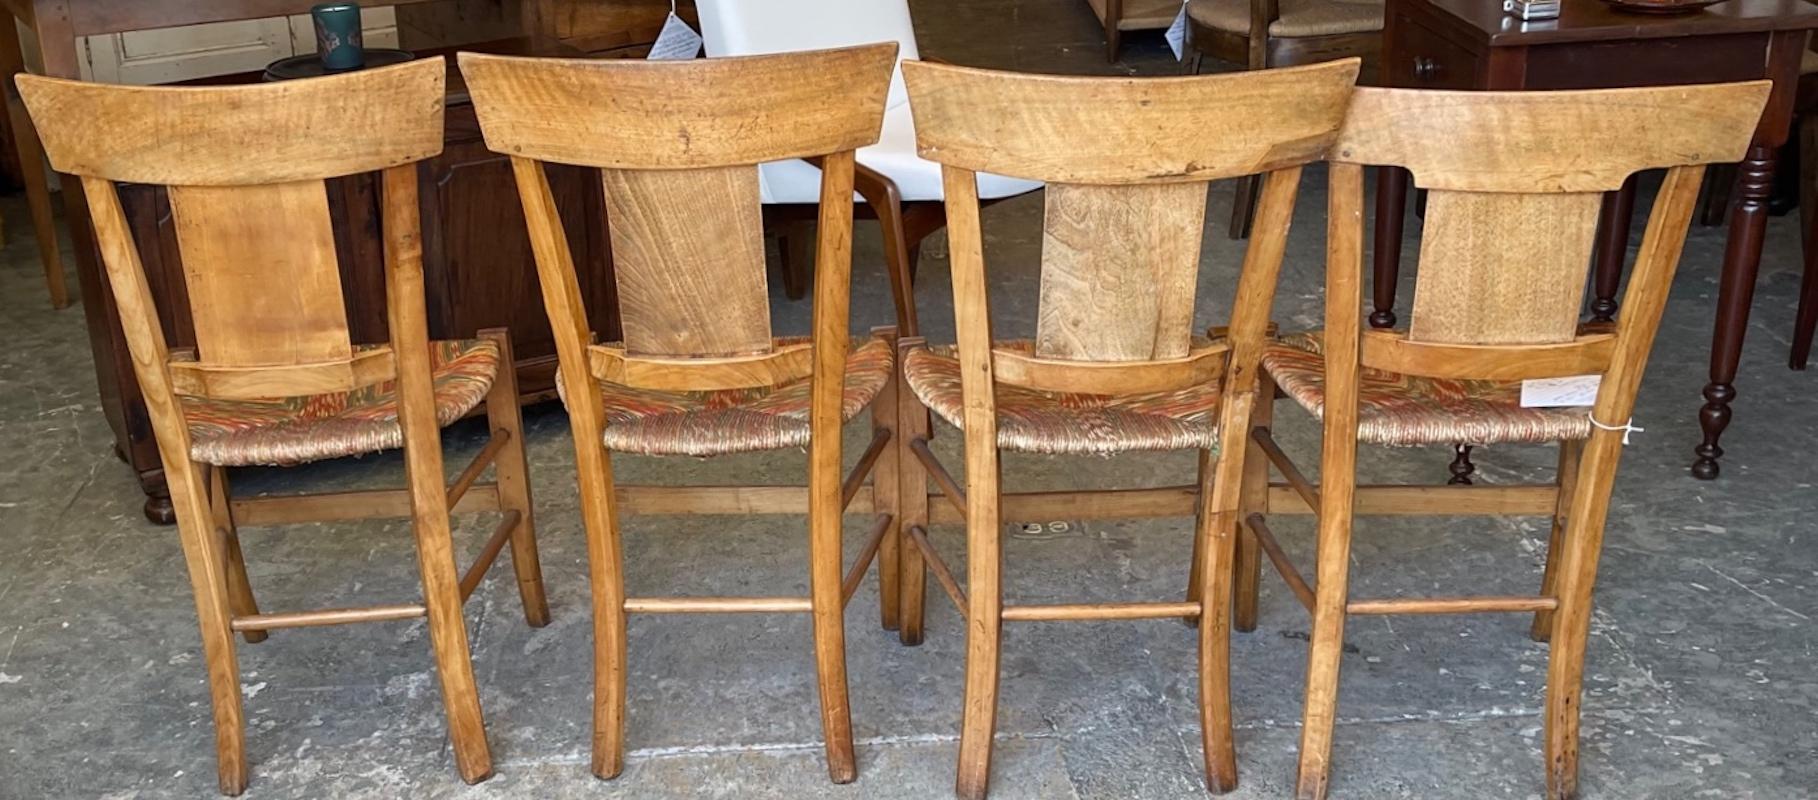 2 French 19th Century Fruitwood Les Incas Side Chairs with Original Rush Seats For Sale 3